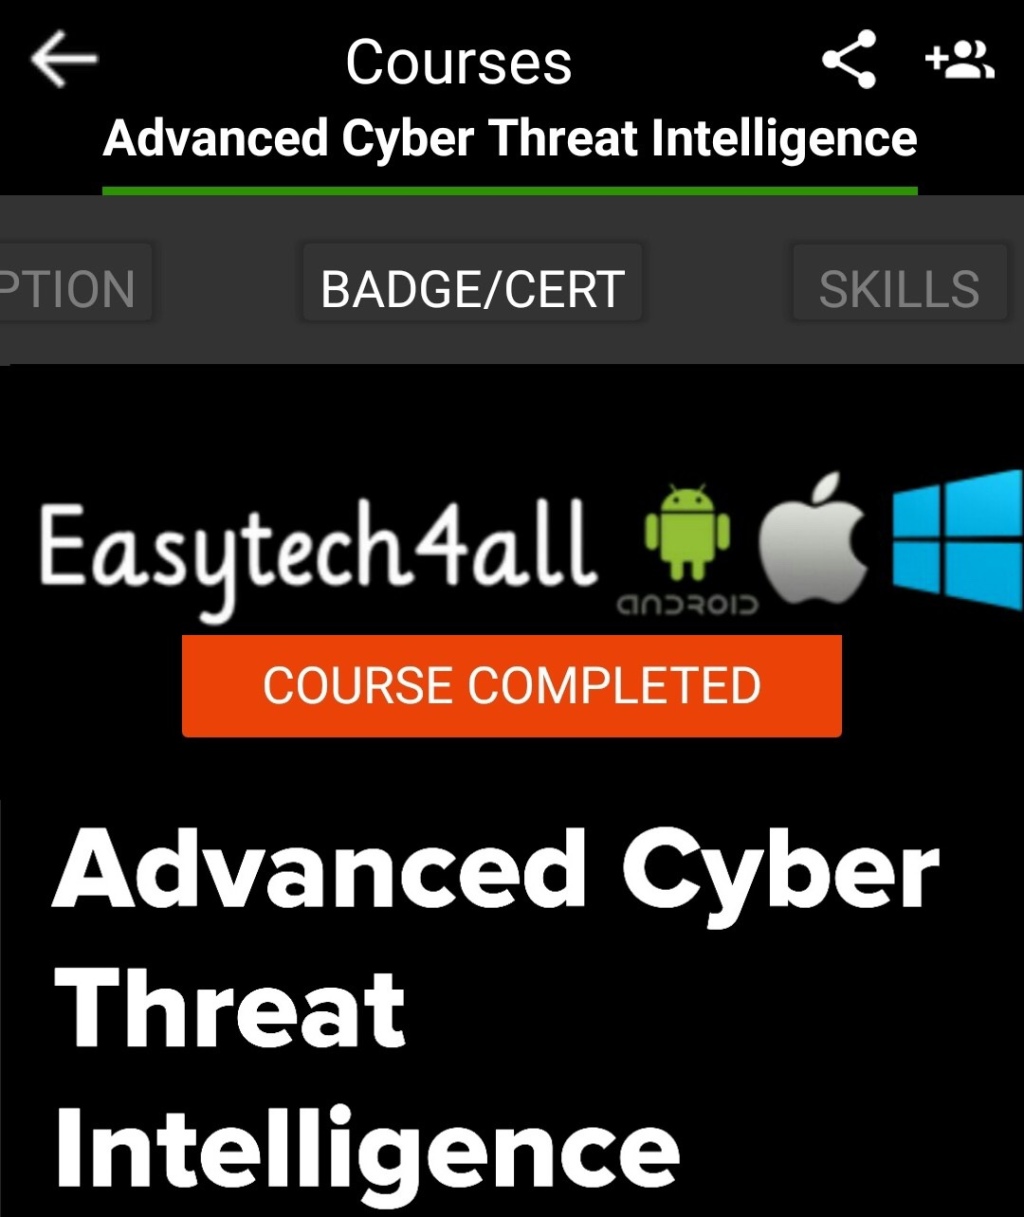 1Power Advanced Cyber Intelligence Research. #Cybersecurity #Consultancy for mobile ecosystems.